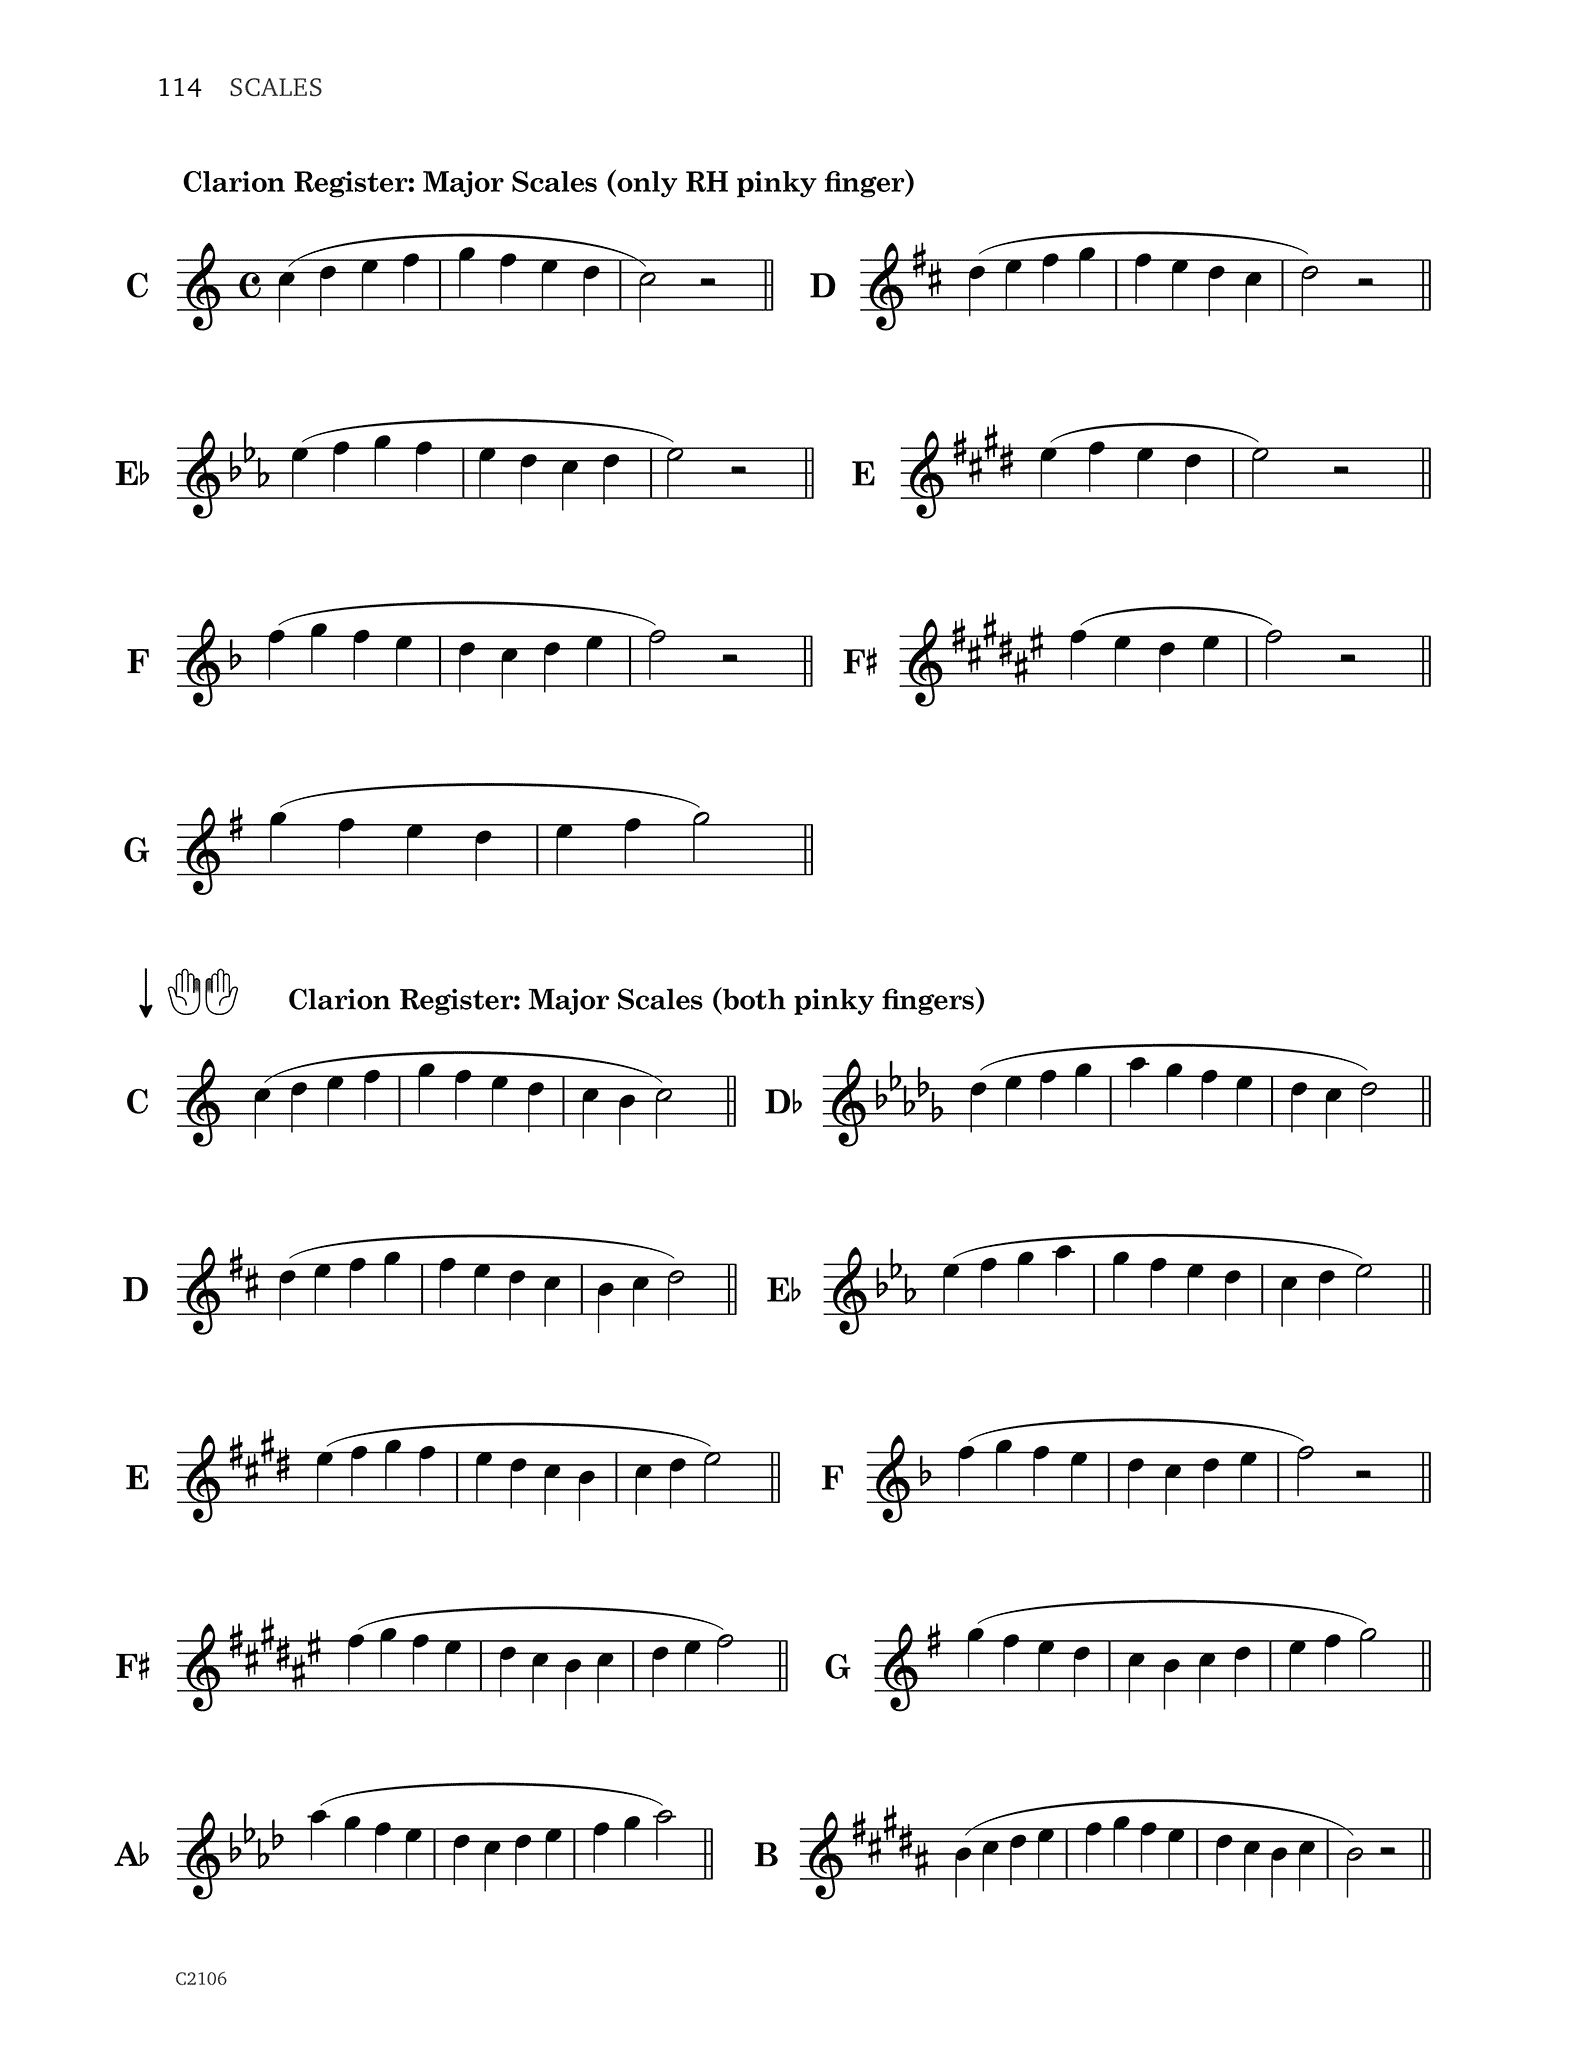 Druhan One Handed Clarinetist’s Workbook page 114 right hand scales